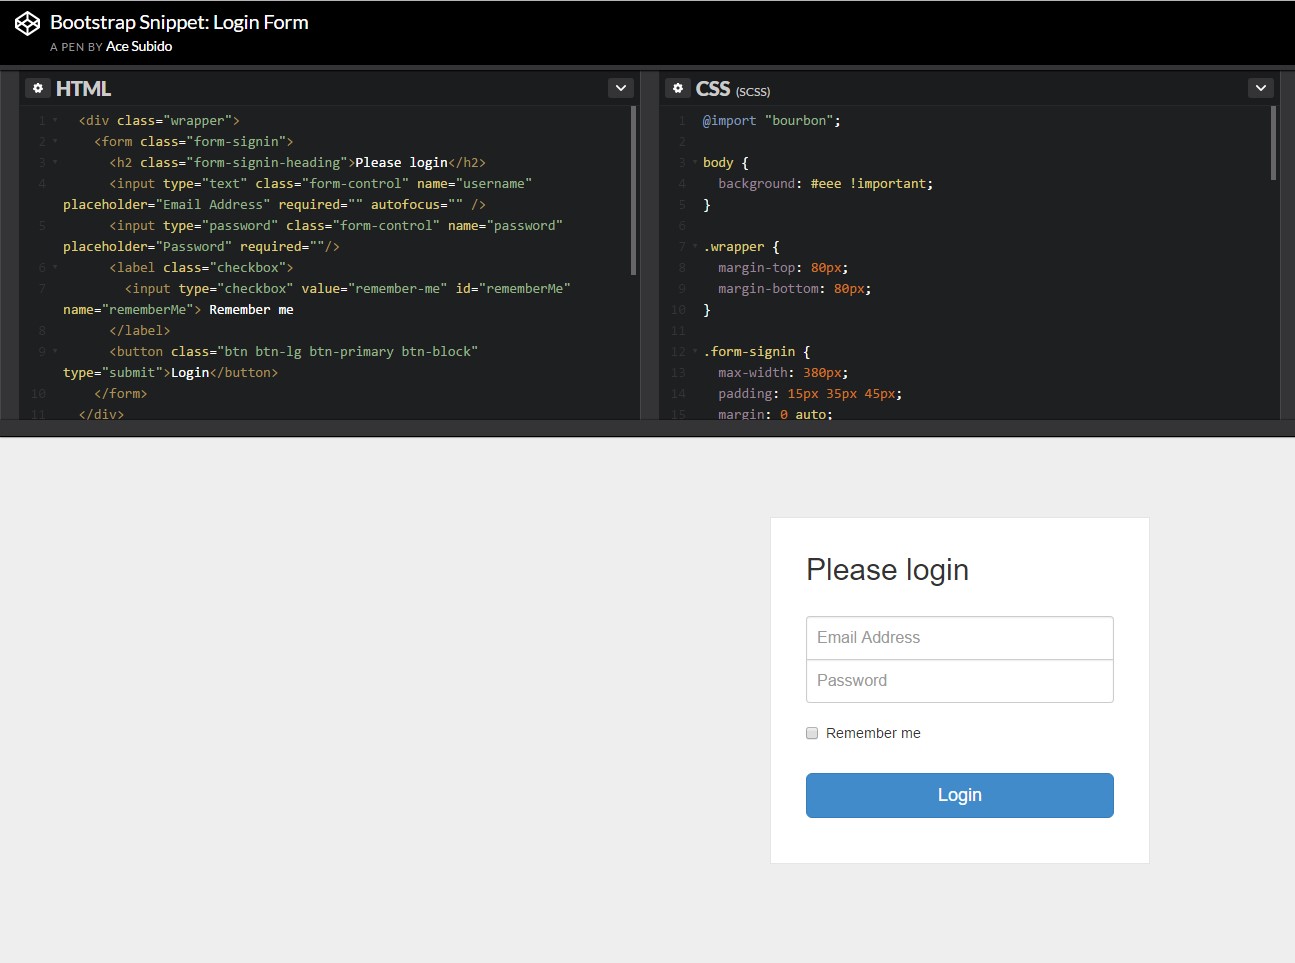  An additional  representation of Bootstrap Login Form